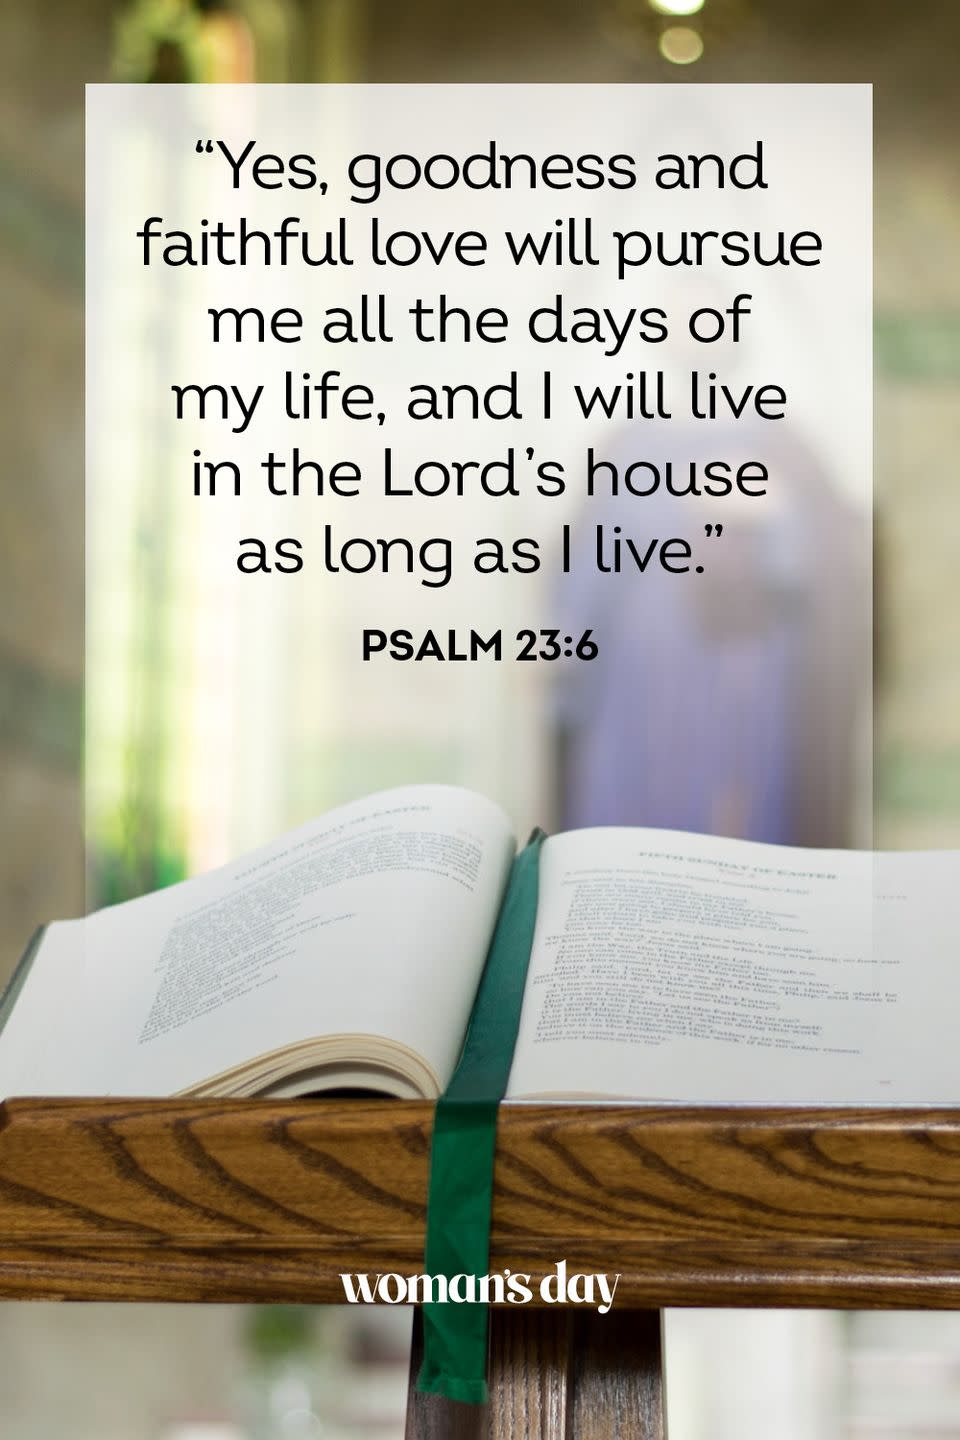 <p>“Yes, goodness and faithful love will pursue me all the days of my life, and I will live in the Lord’s house as long as I live.” </p>